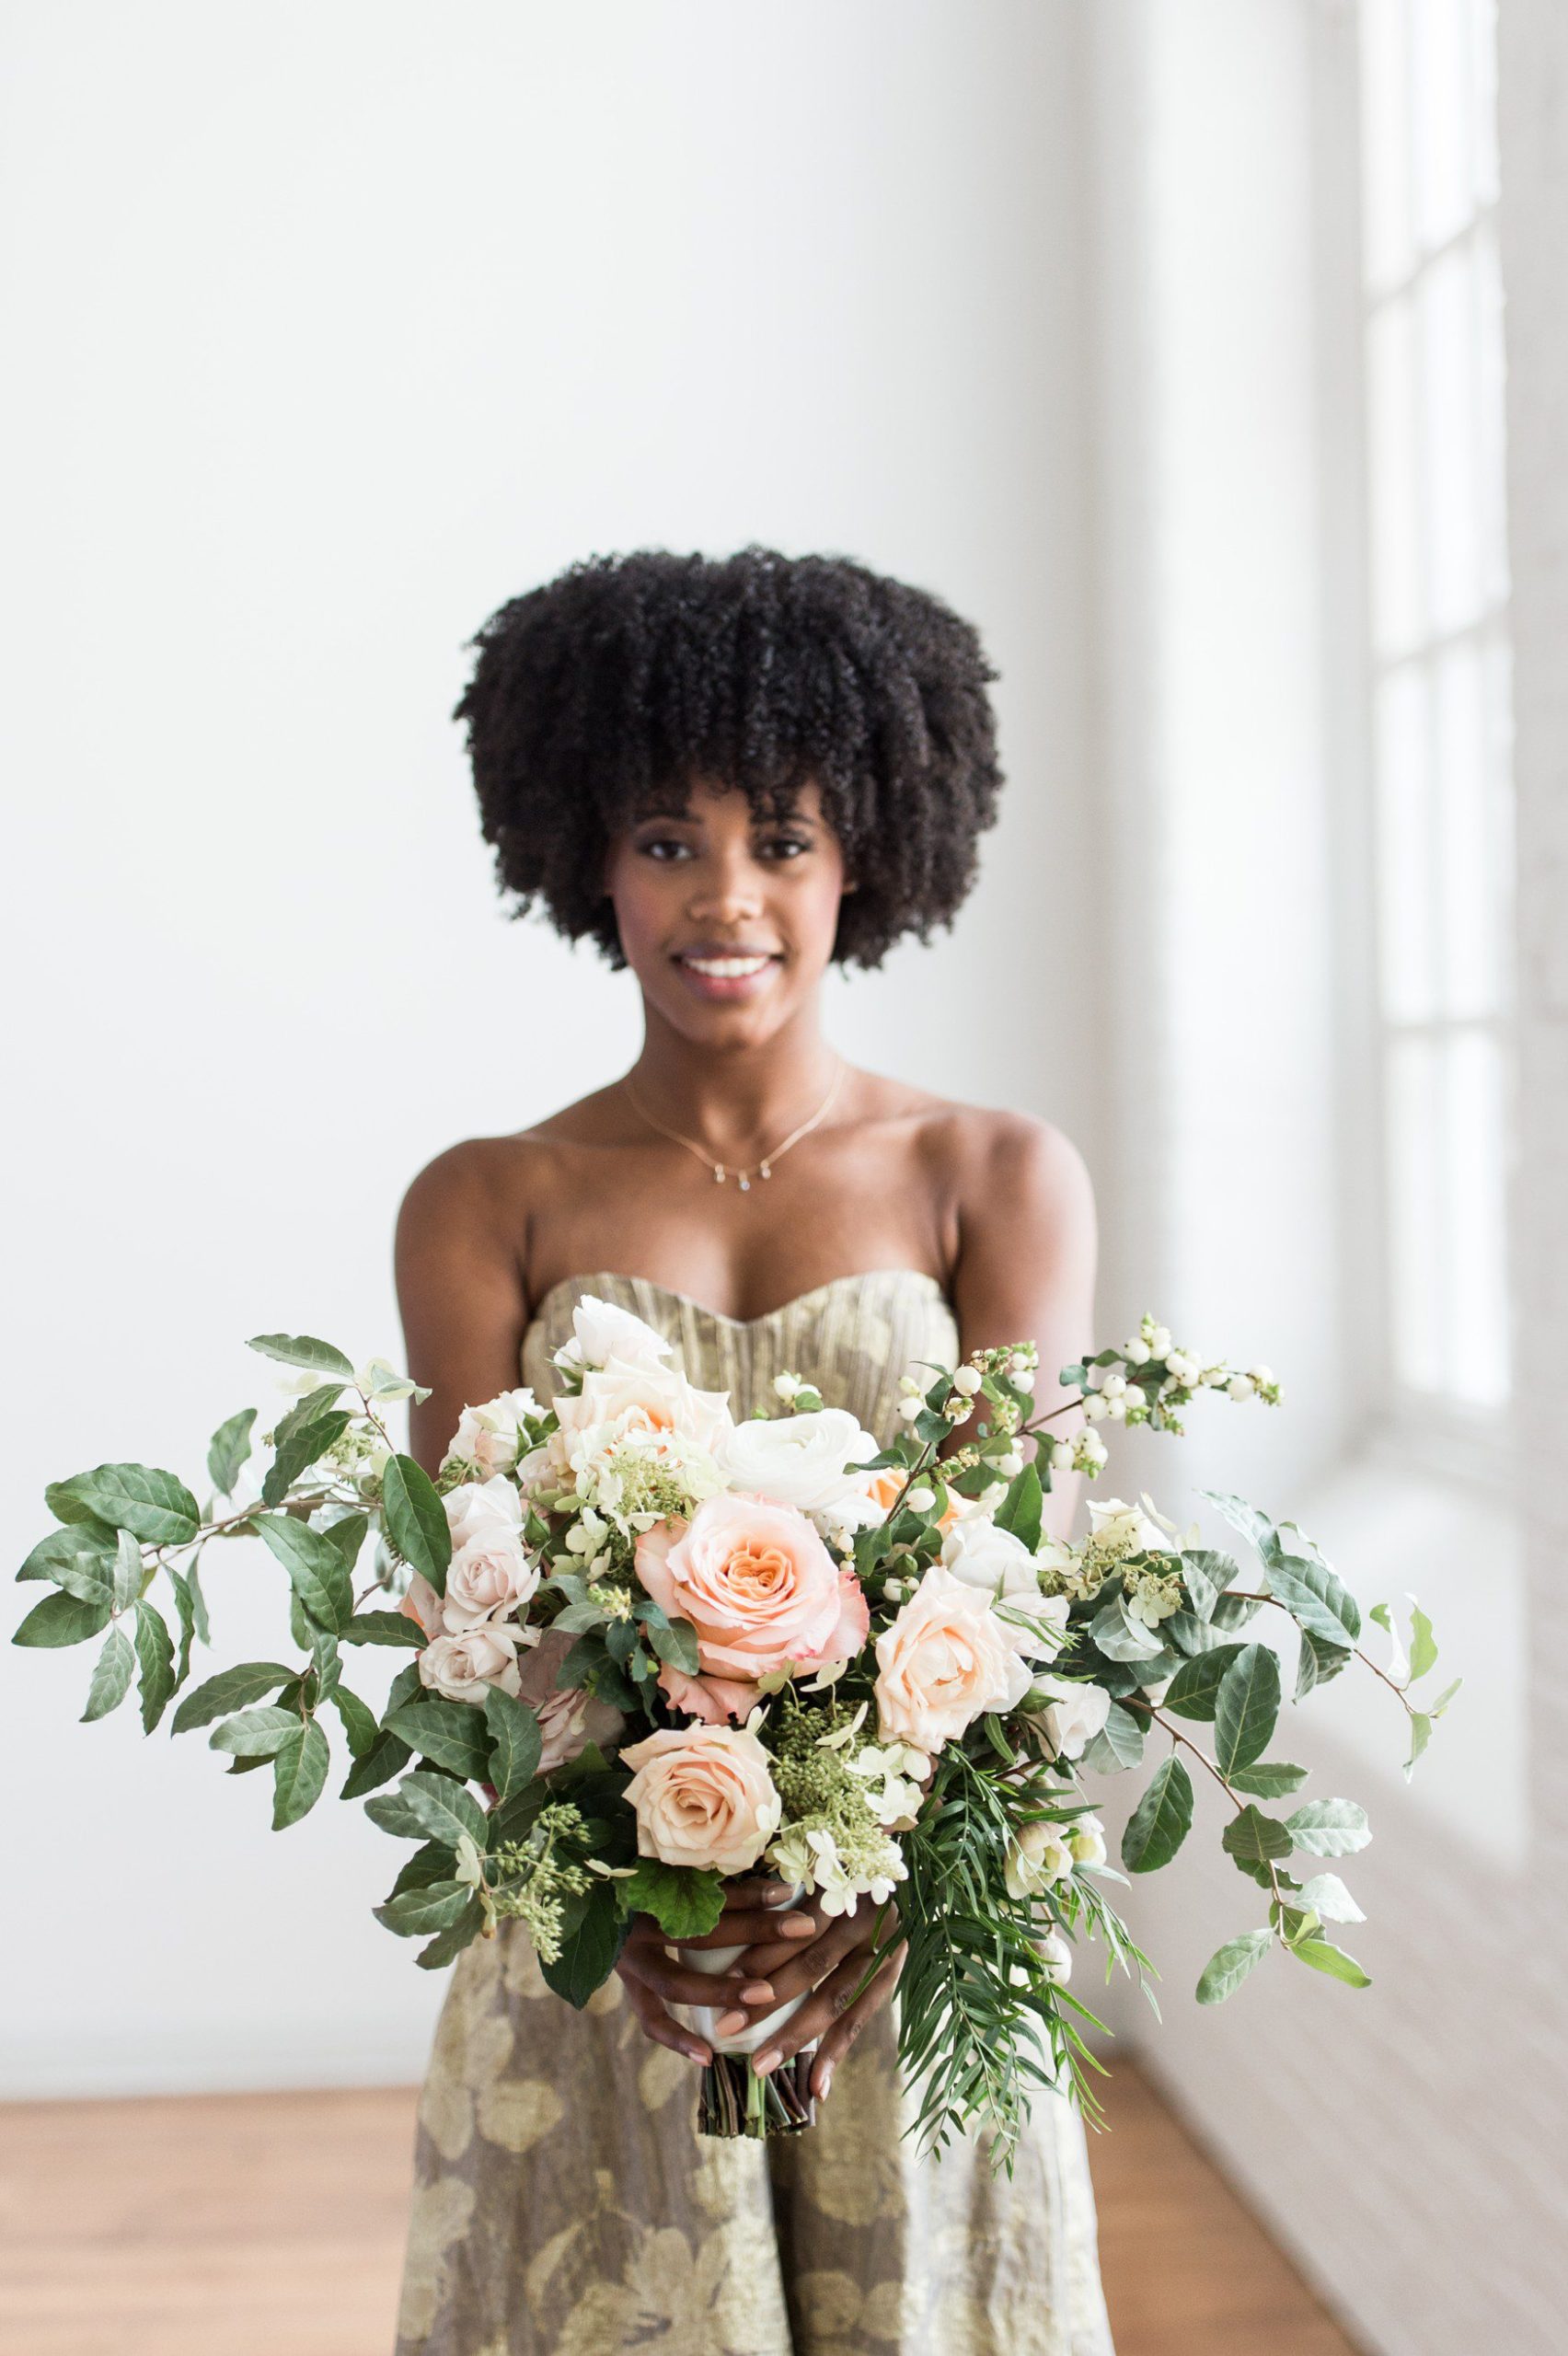 3 tips for how to hold your bouquet
